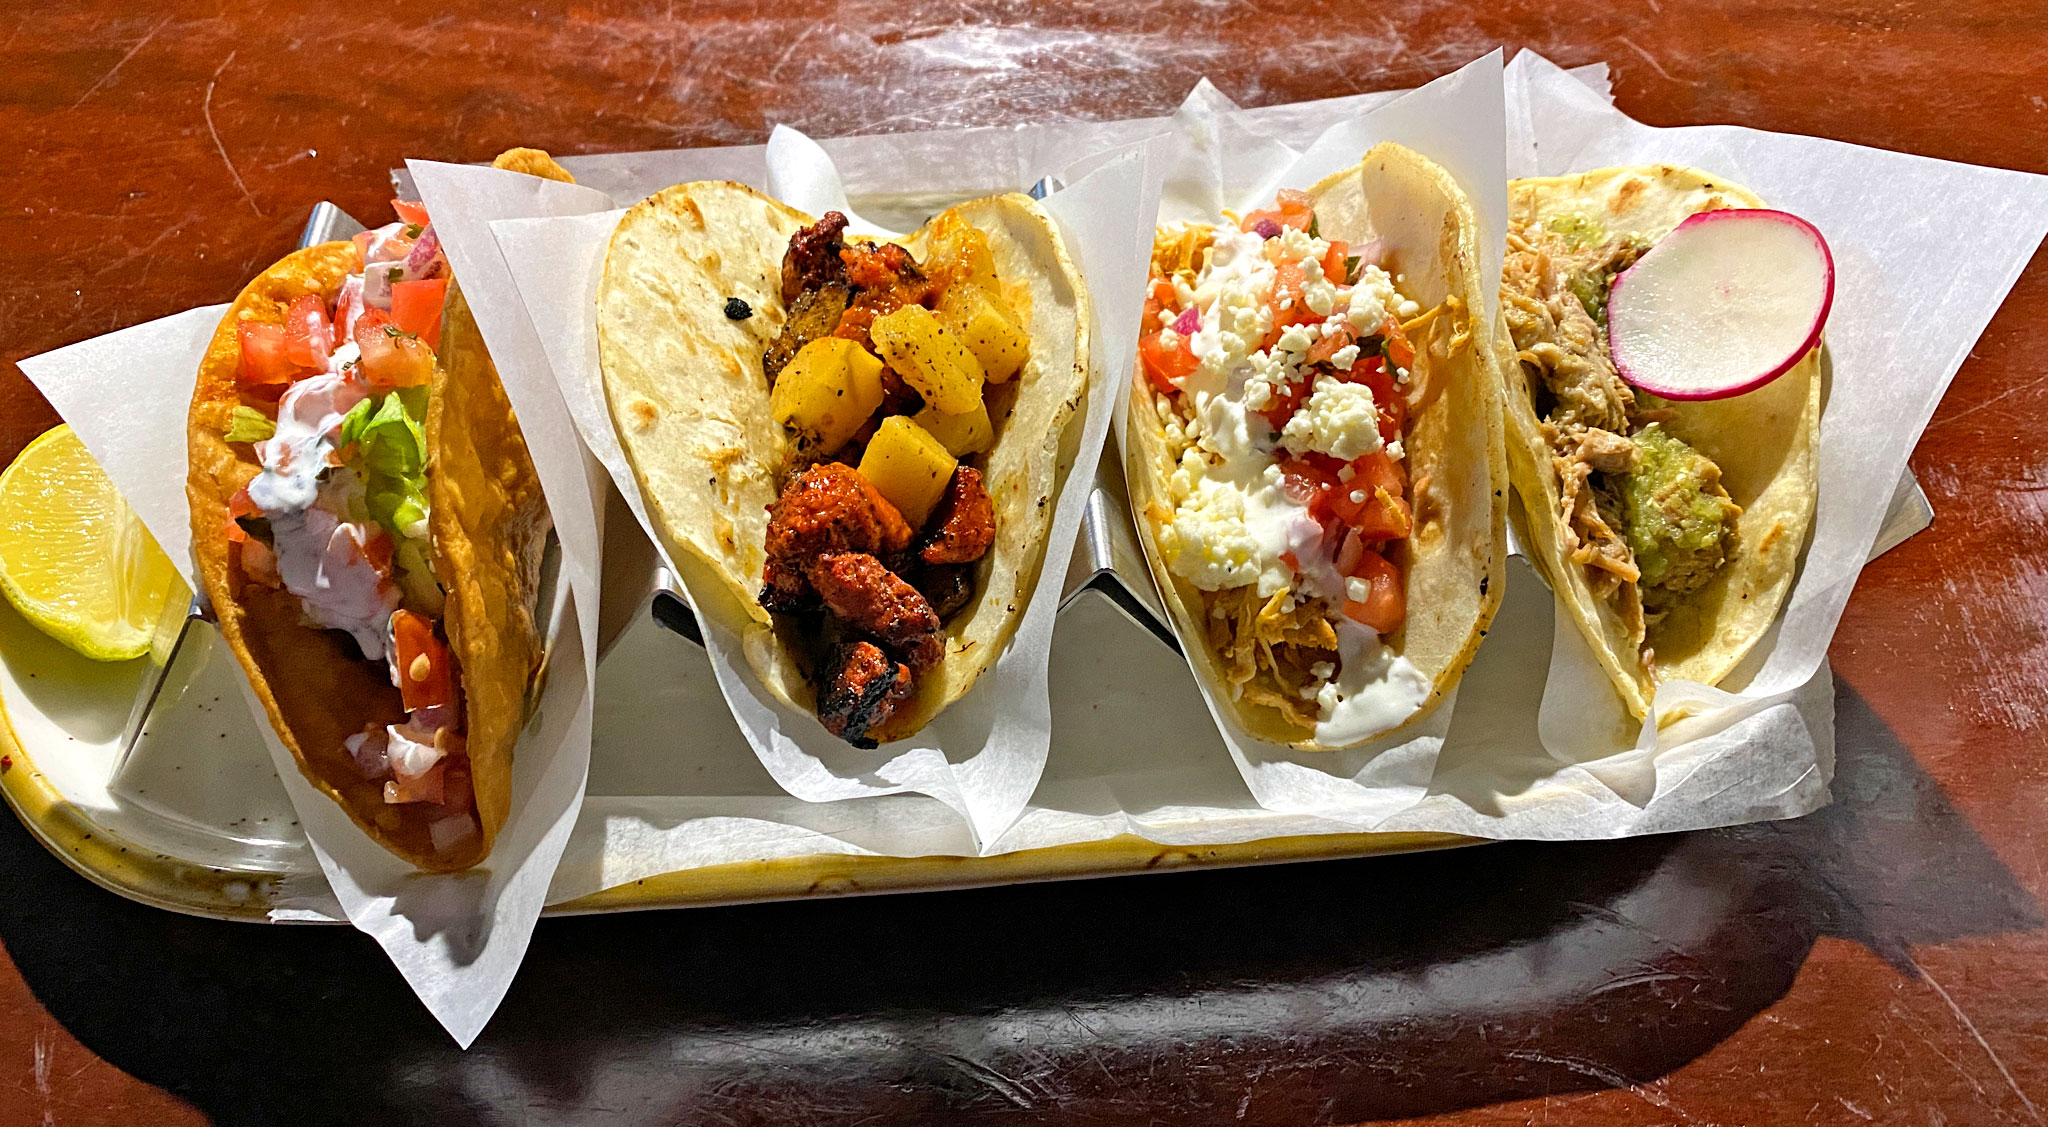 Taco Sampler - 4 Tacos - (R to L) Carnitas, Chicken Tinga, Pastor, and Hard Shell with Ground Beef Picadillo